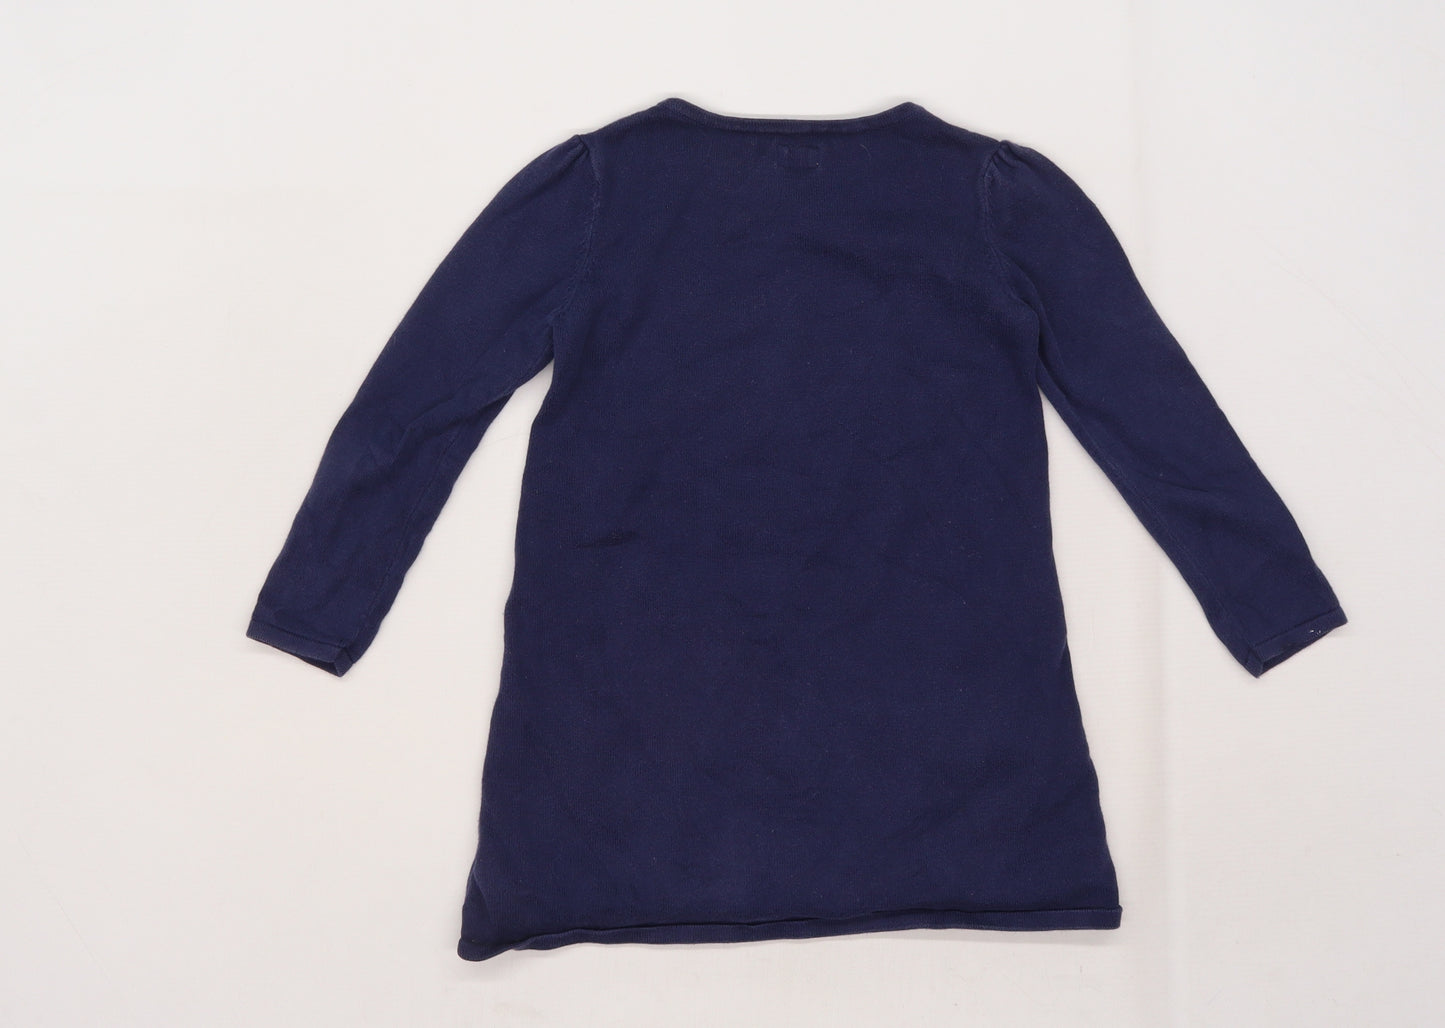 F&F Girls Blue   Pullover Jumper Size 4-5 Years  - Butterfly